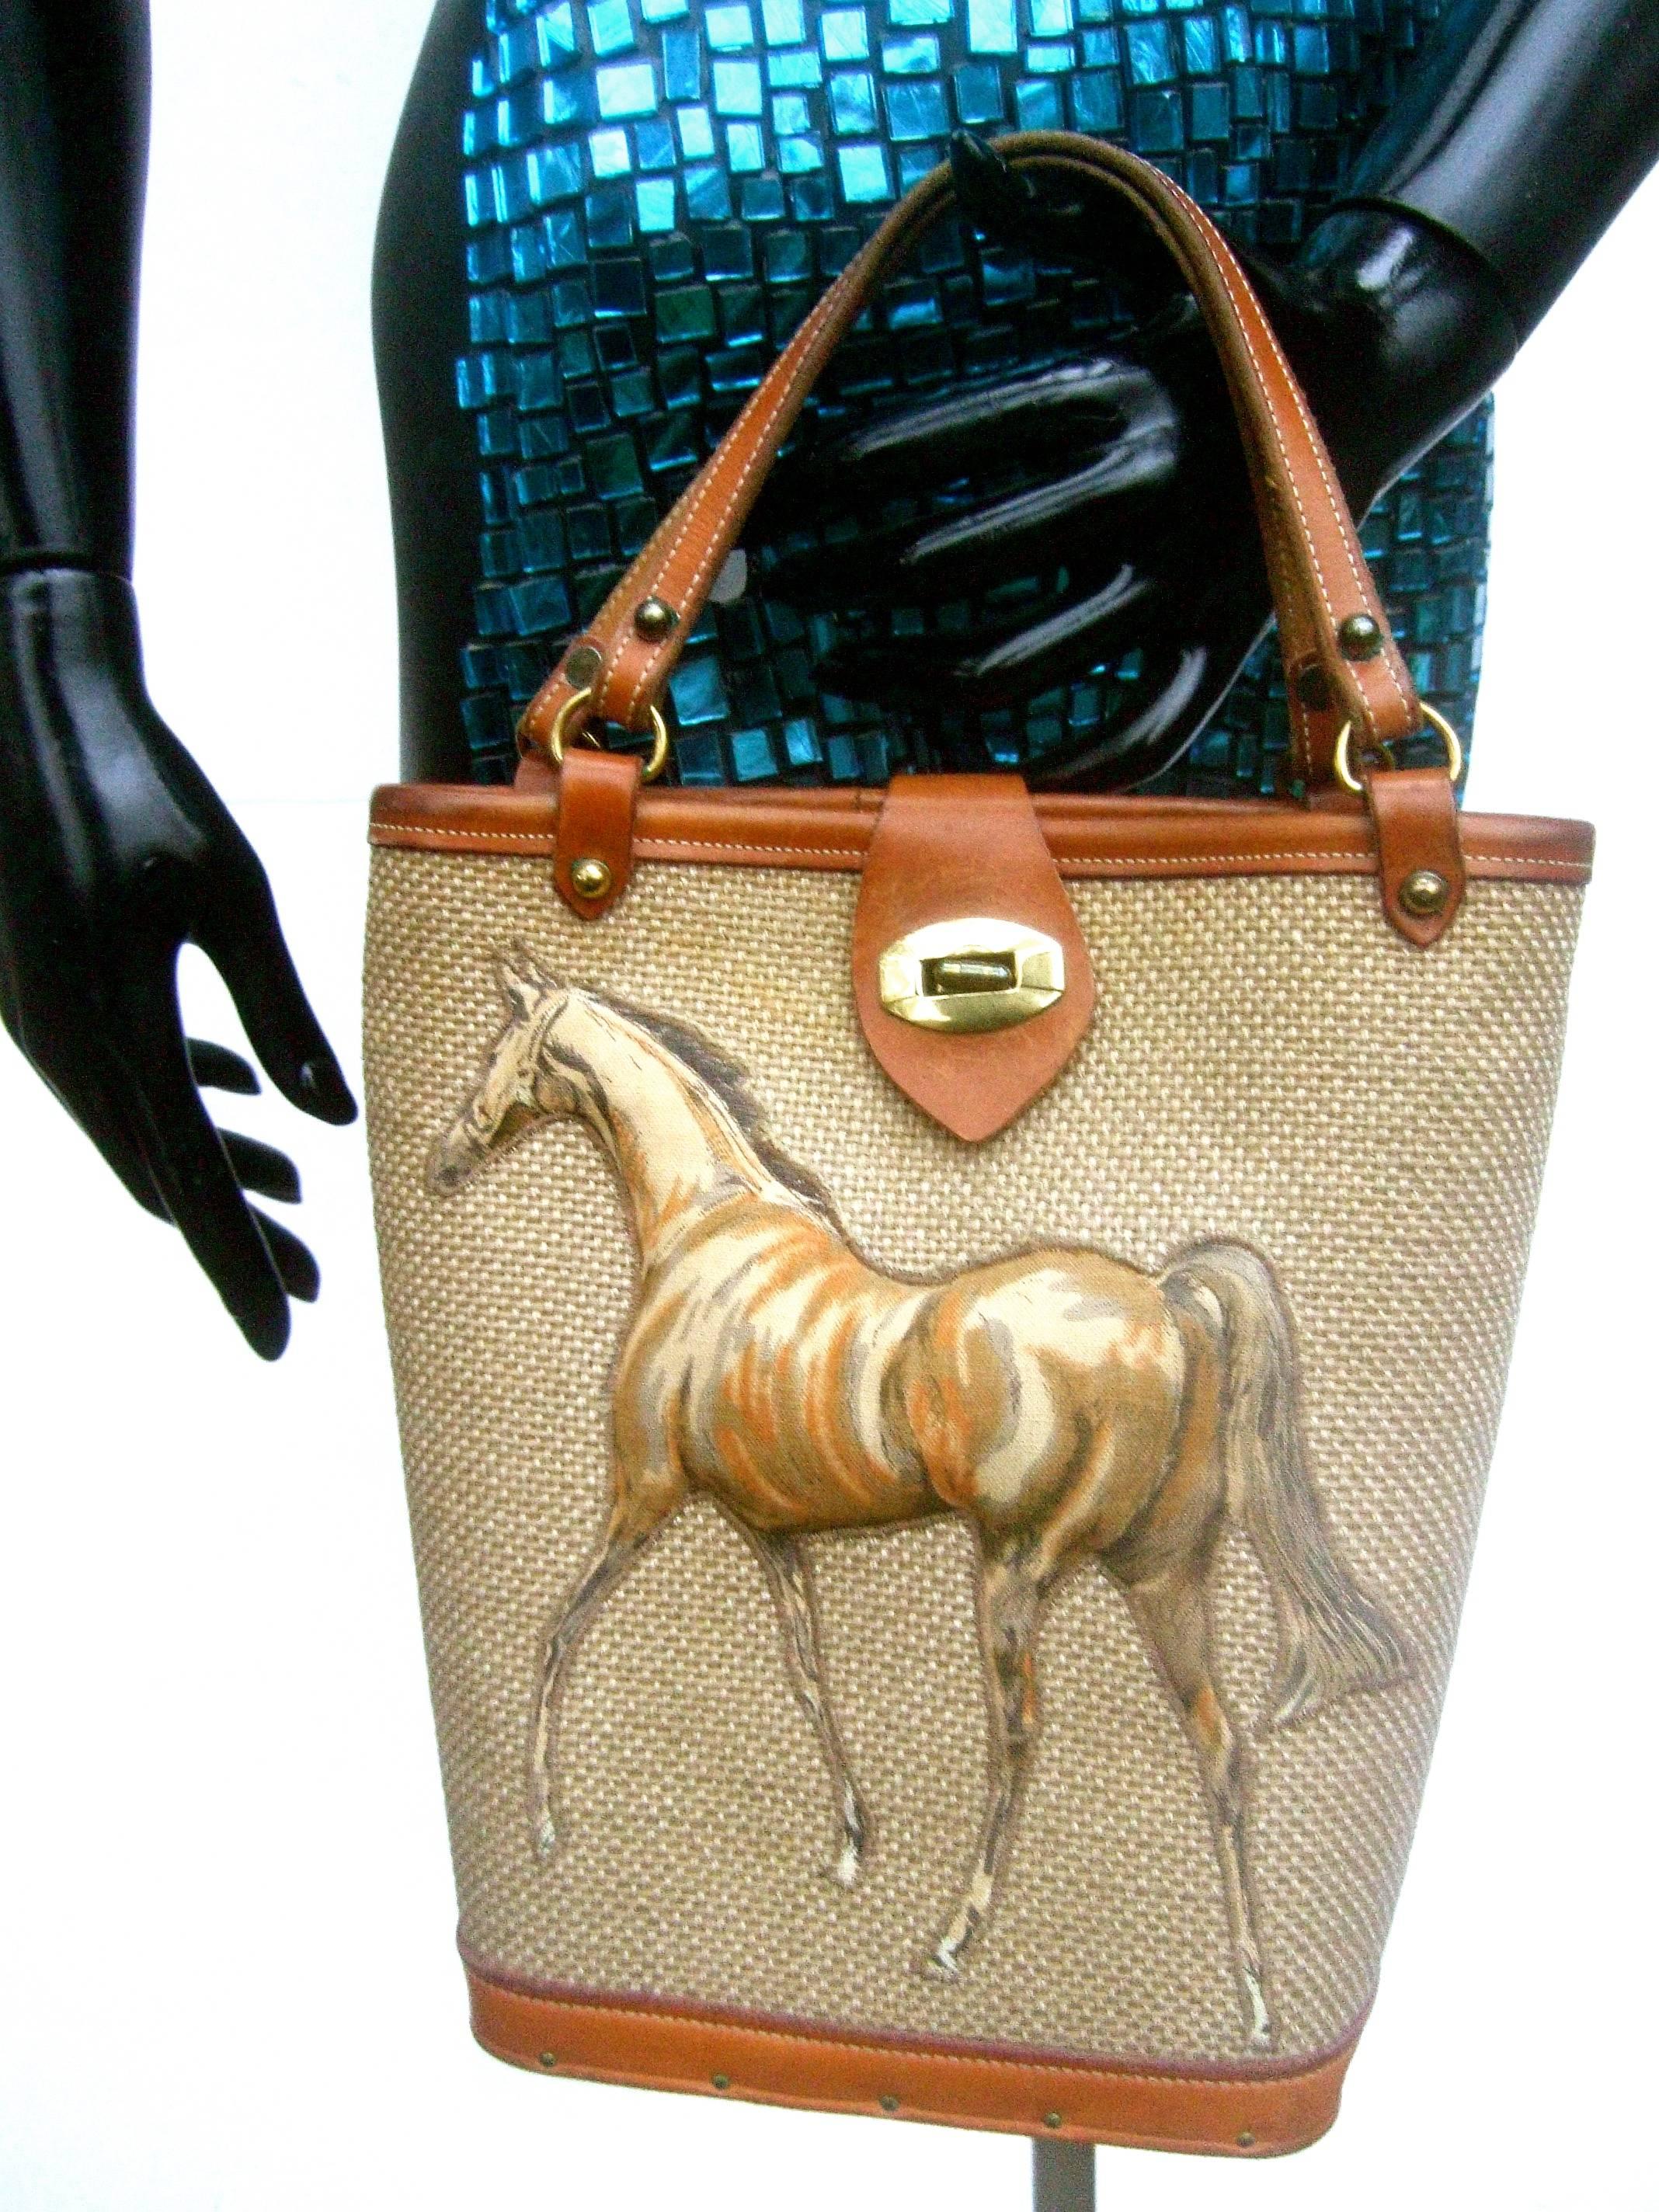 1960s Burlap cloth quilted equine leather trim handbag 
The unique retro tote style handbag is decorated with a three
dimensional quilted cloth horse figure on the front

The vintage midcentury handbag is designed with a burlap 
cloth panel that